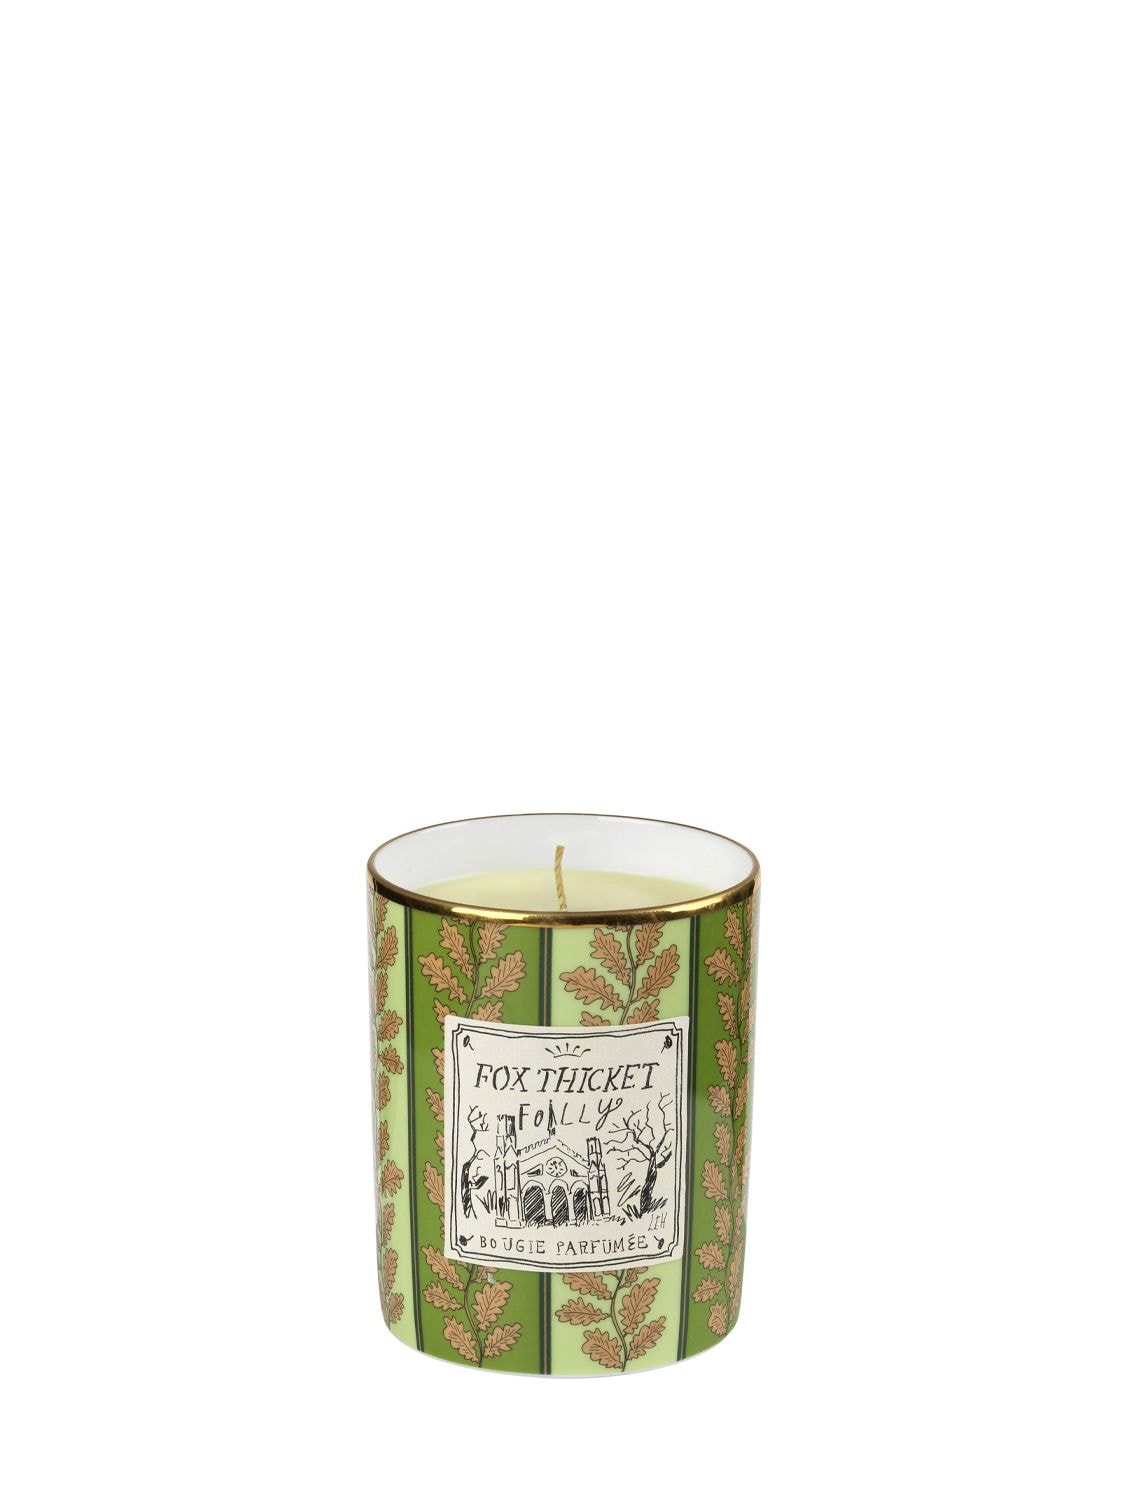 Image of Fox Thicket Folly Regular Scented Candle